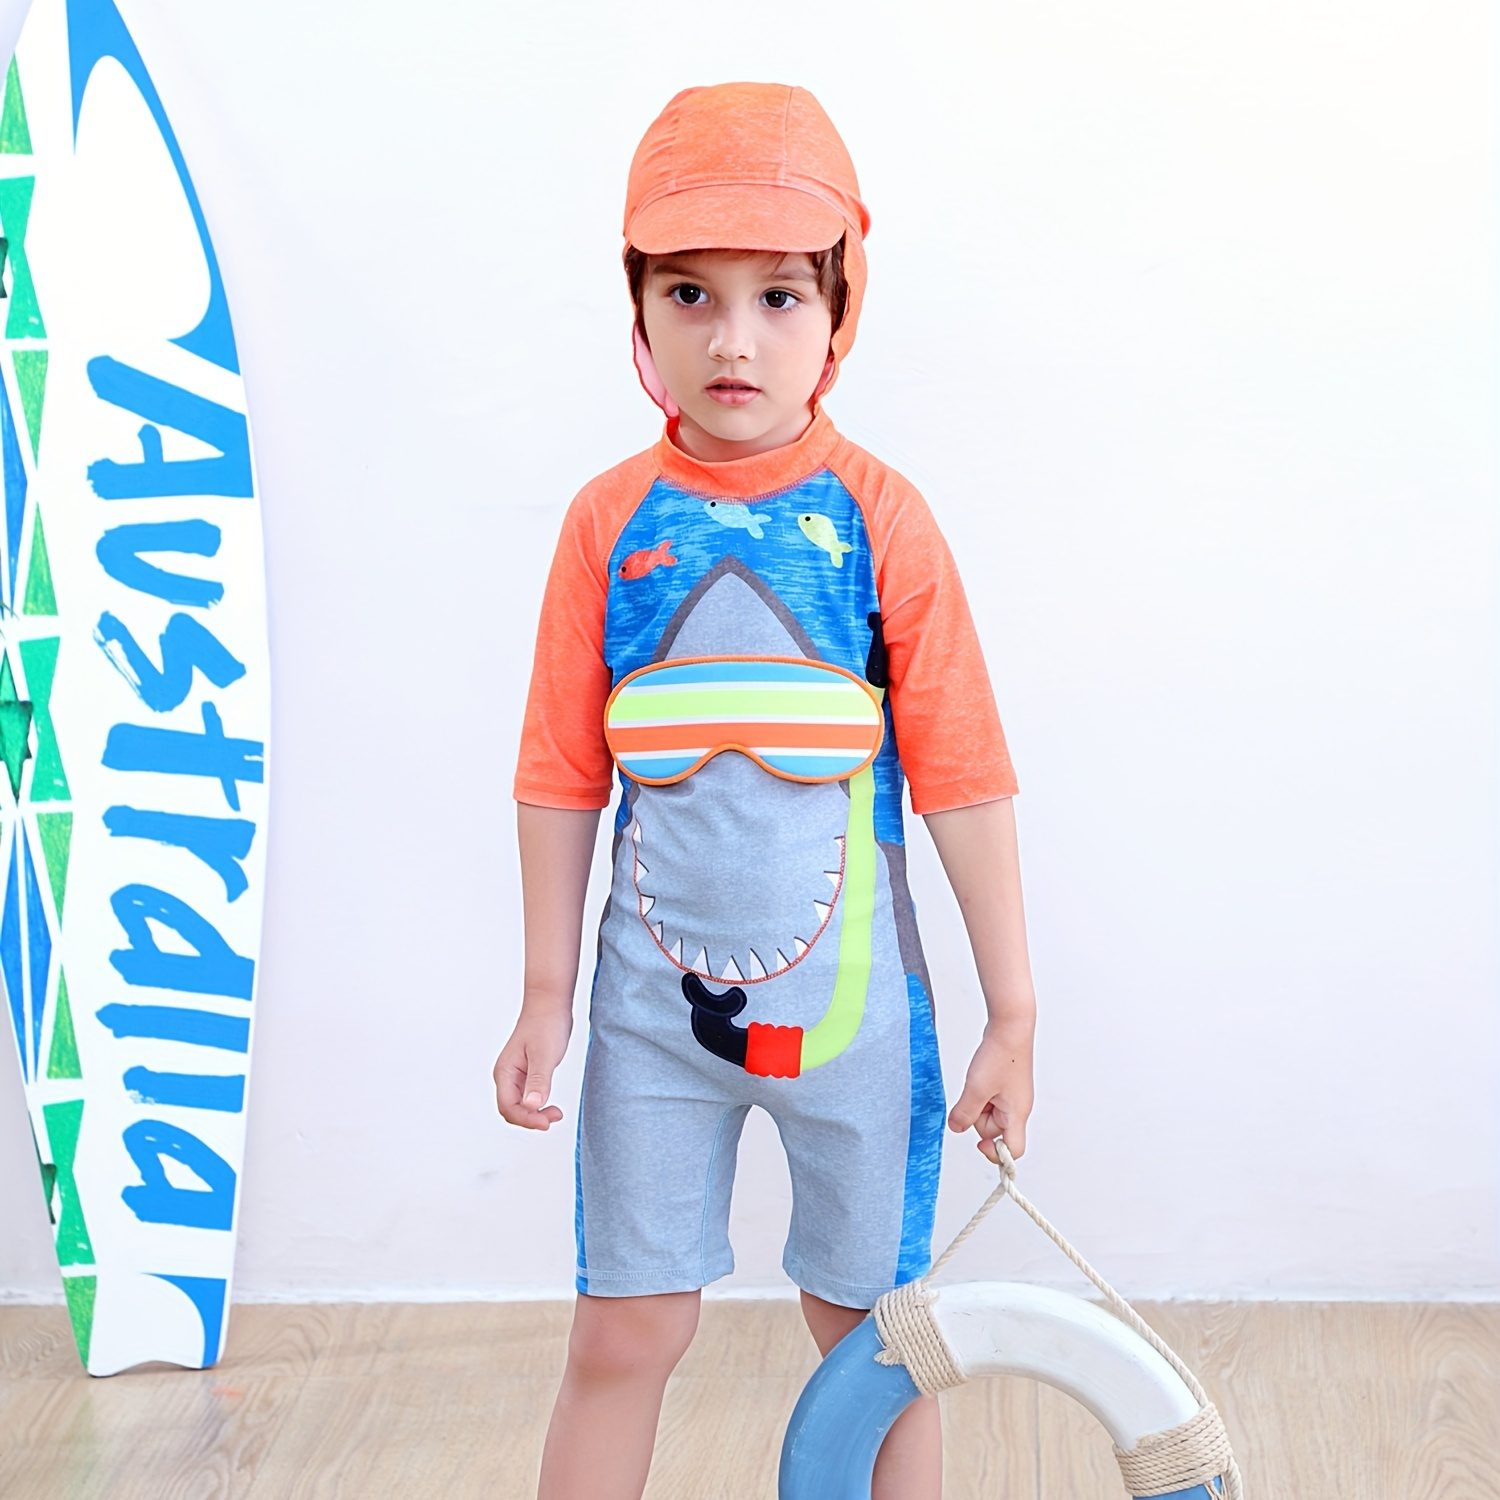 

Toddler Kid's Shark Diver Pattern One-piece Swimsuit & Hat, Stretchy Bathing Suit, Baby Boy's Swimwear For Beach Holiday